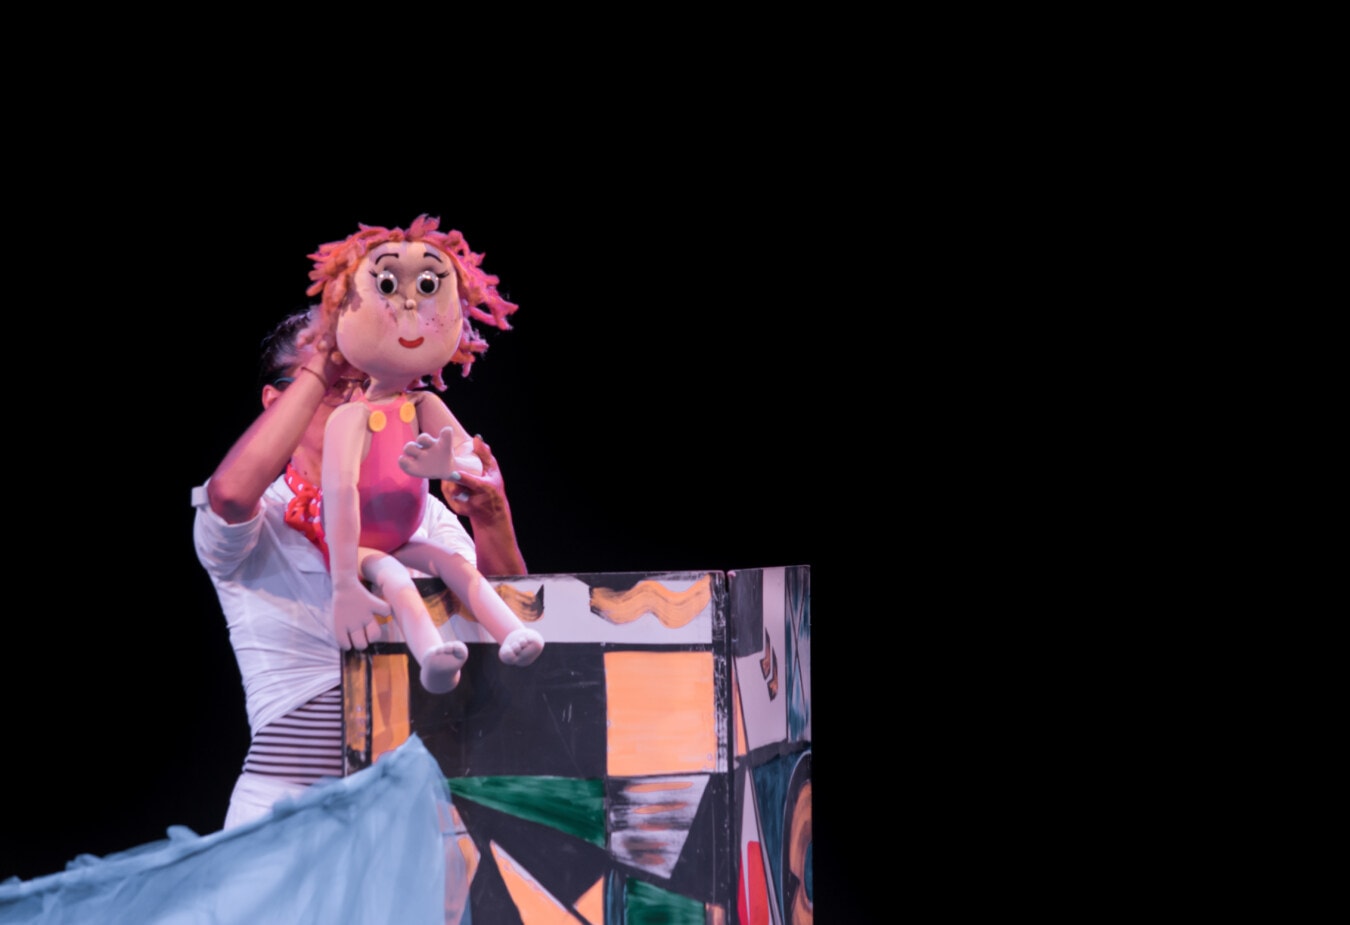 puppet show, theater, doll, costume, show, stage, woman, drama, art, performance